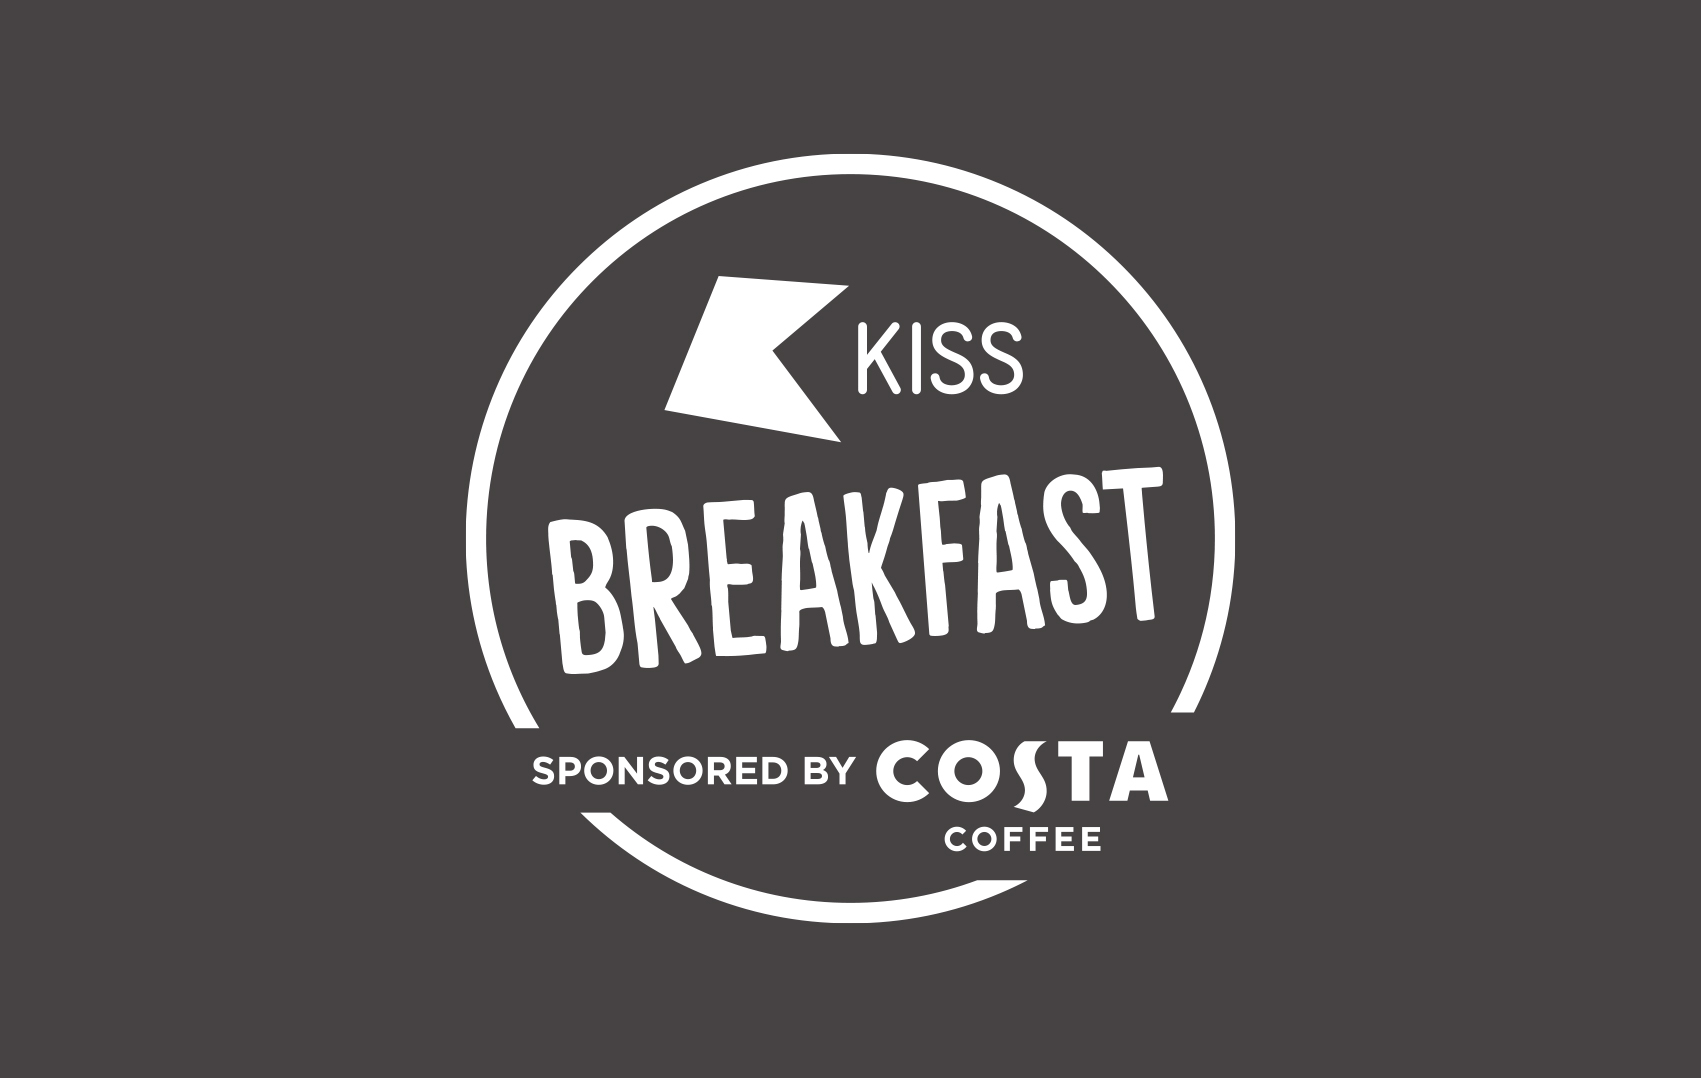 Costa Coffee becomes new year-long Breakfast sponsor of KISS, KISSTORY and KISS Fresh